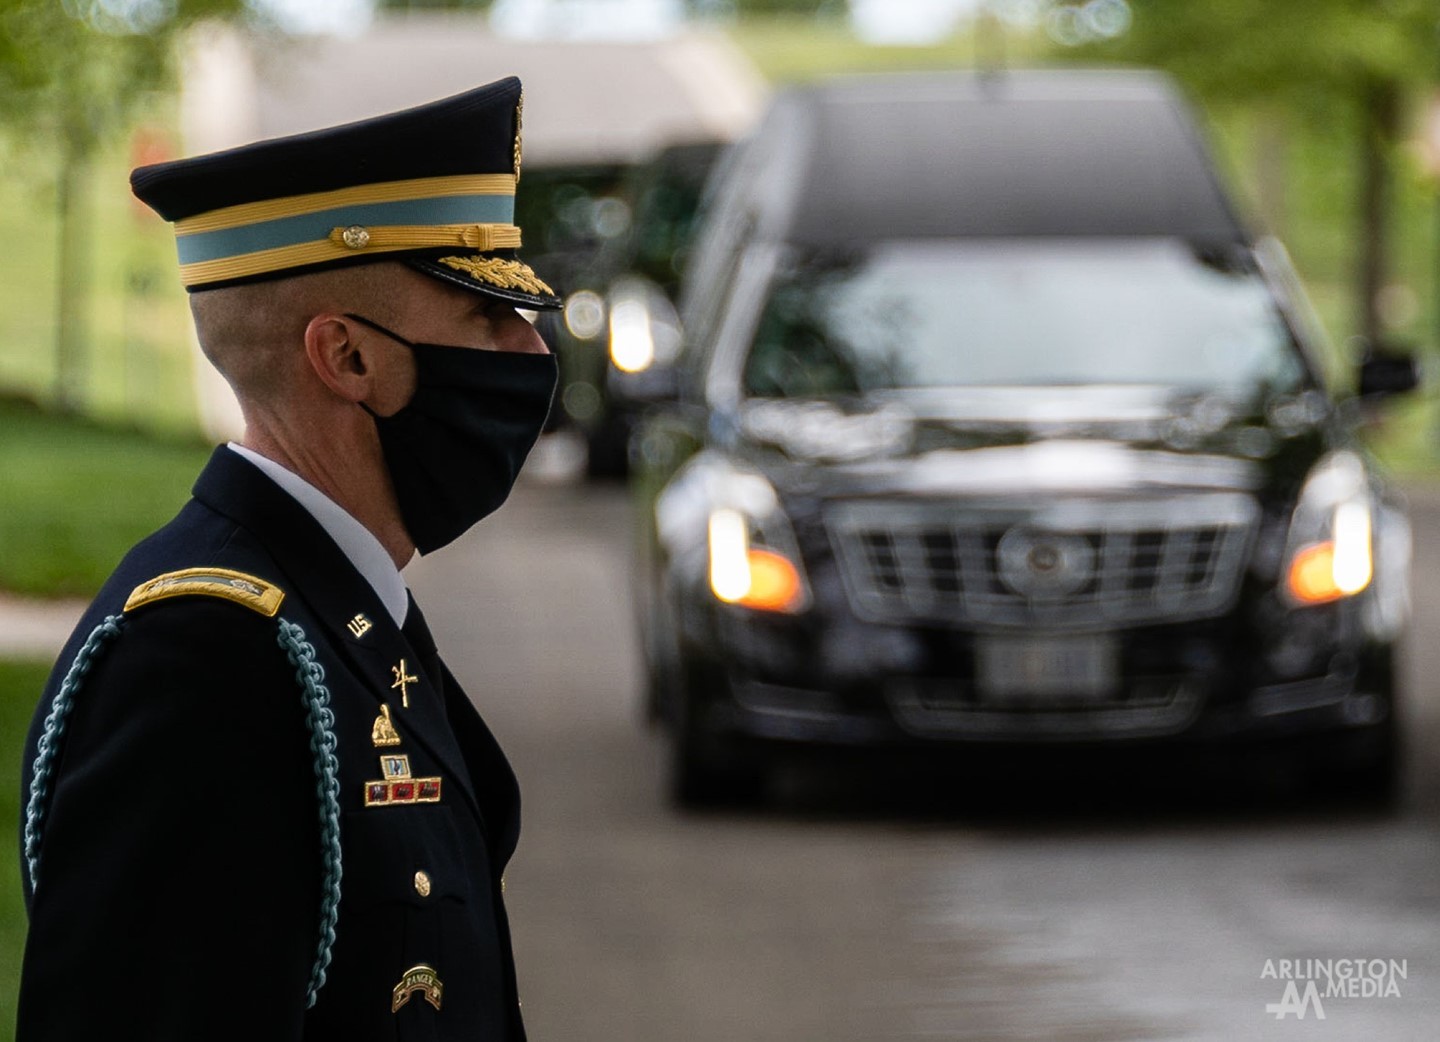 The former commander of the 1st BN, 3rd Infantry Regiment awaits the arrival of a funeral procession to honor an American Hero at Arlington National Cemetery.